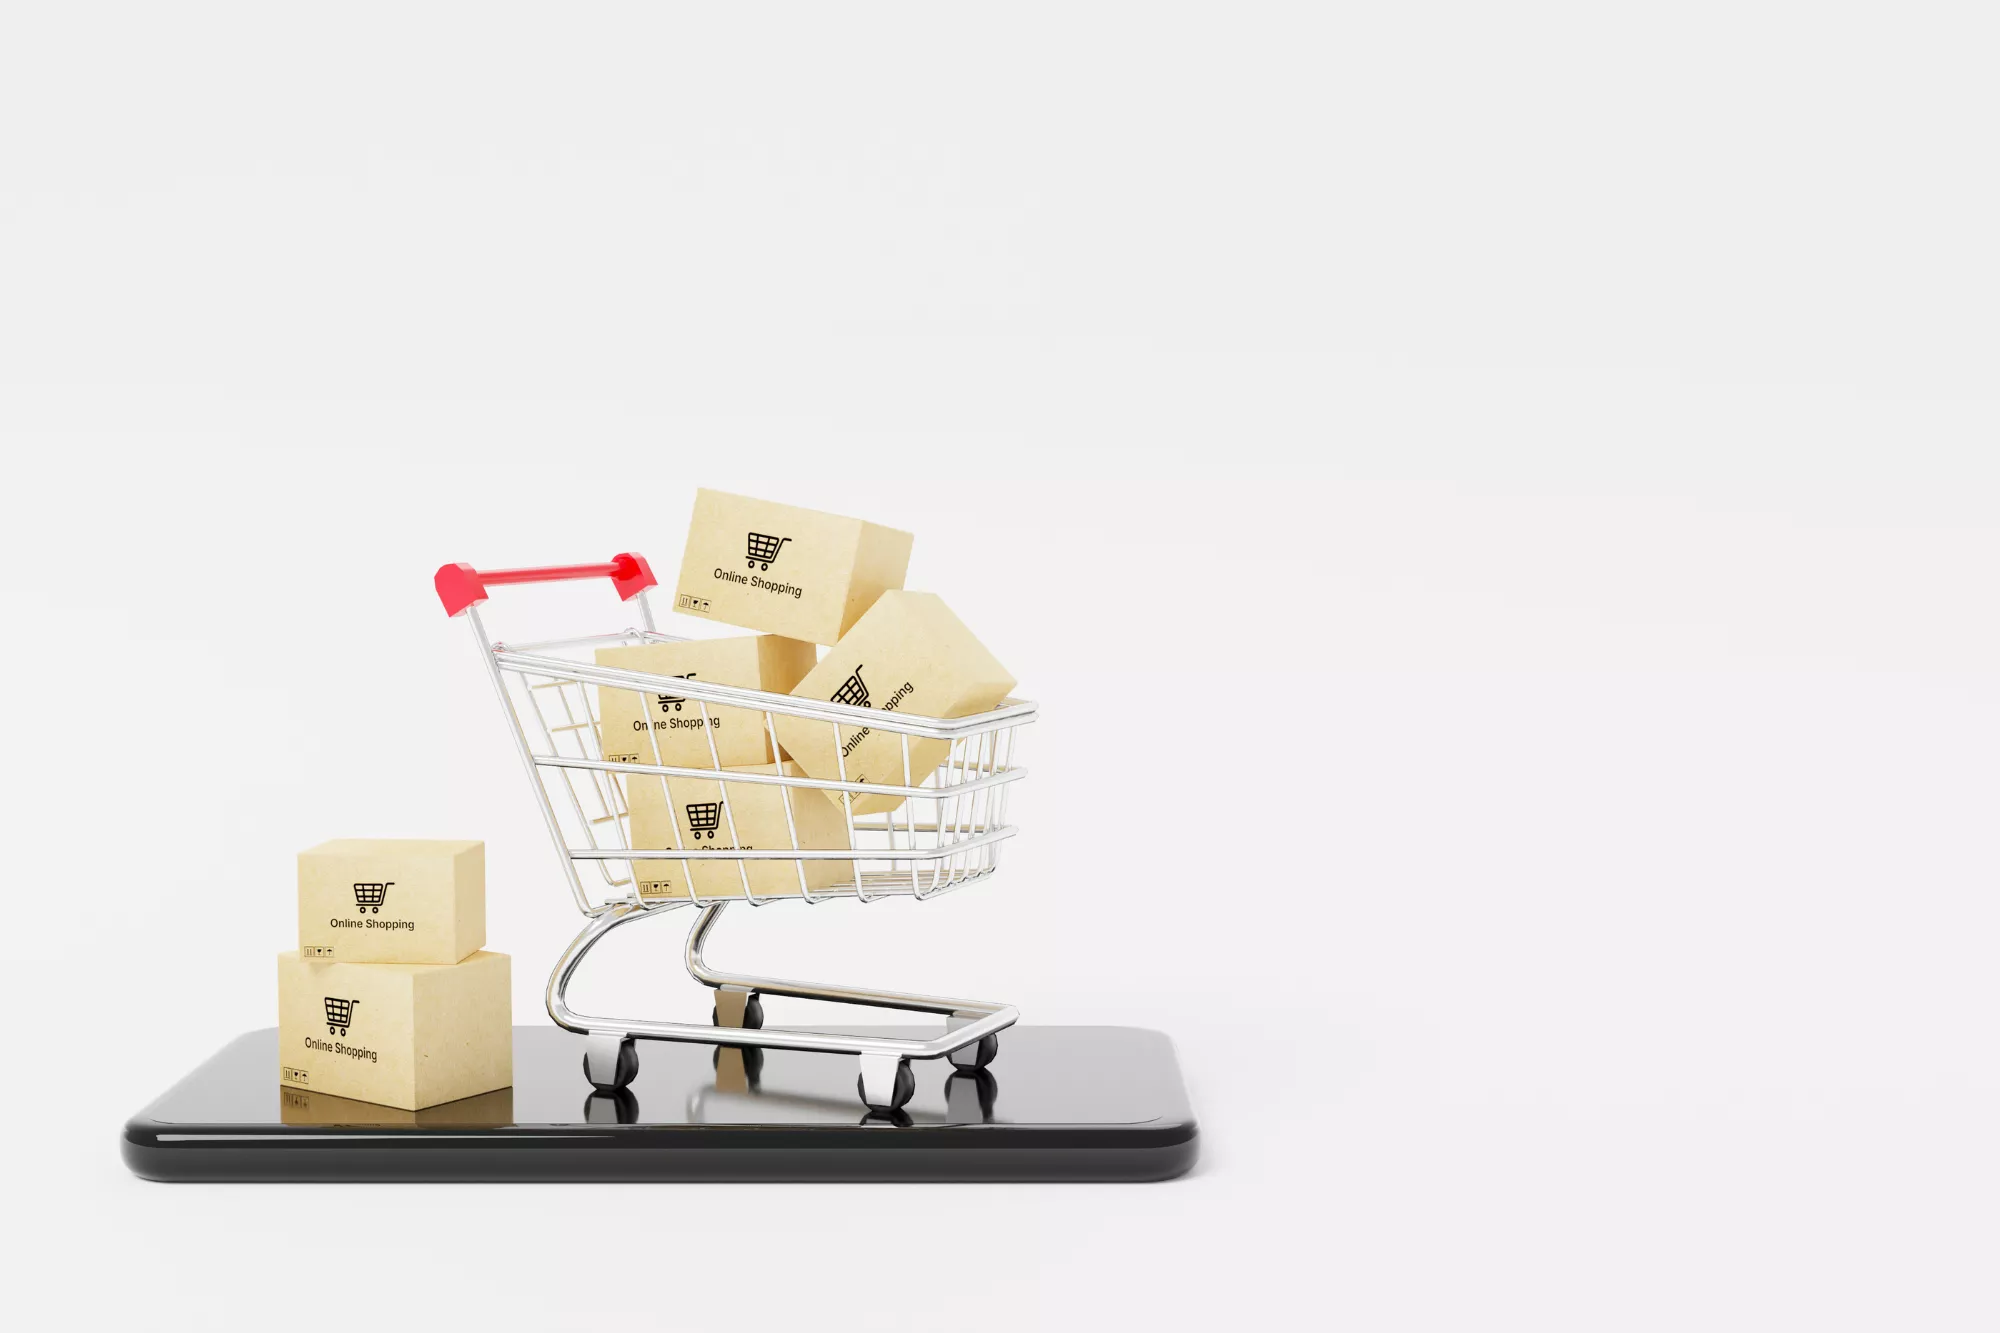 A shopping cart with boxes in it to represent authorize.net fees from online shopping.